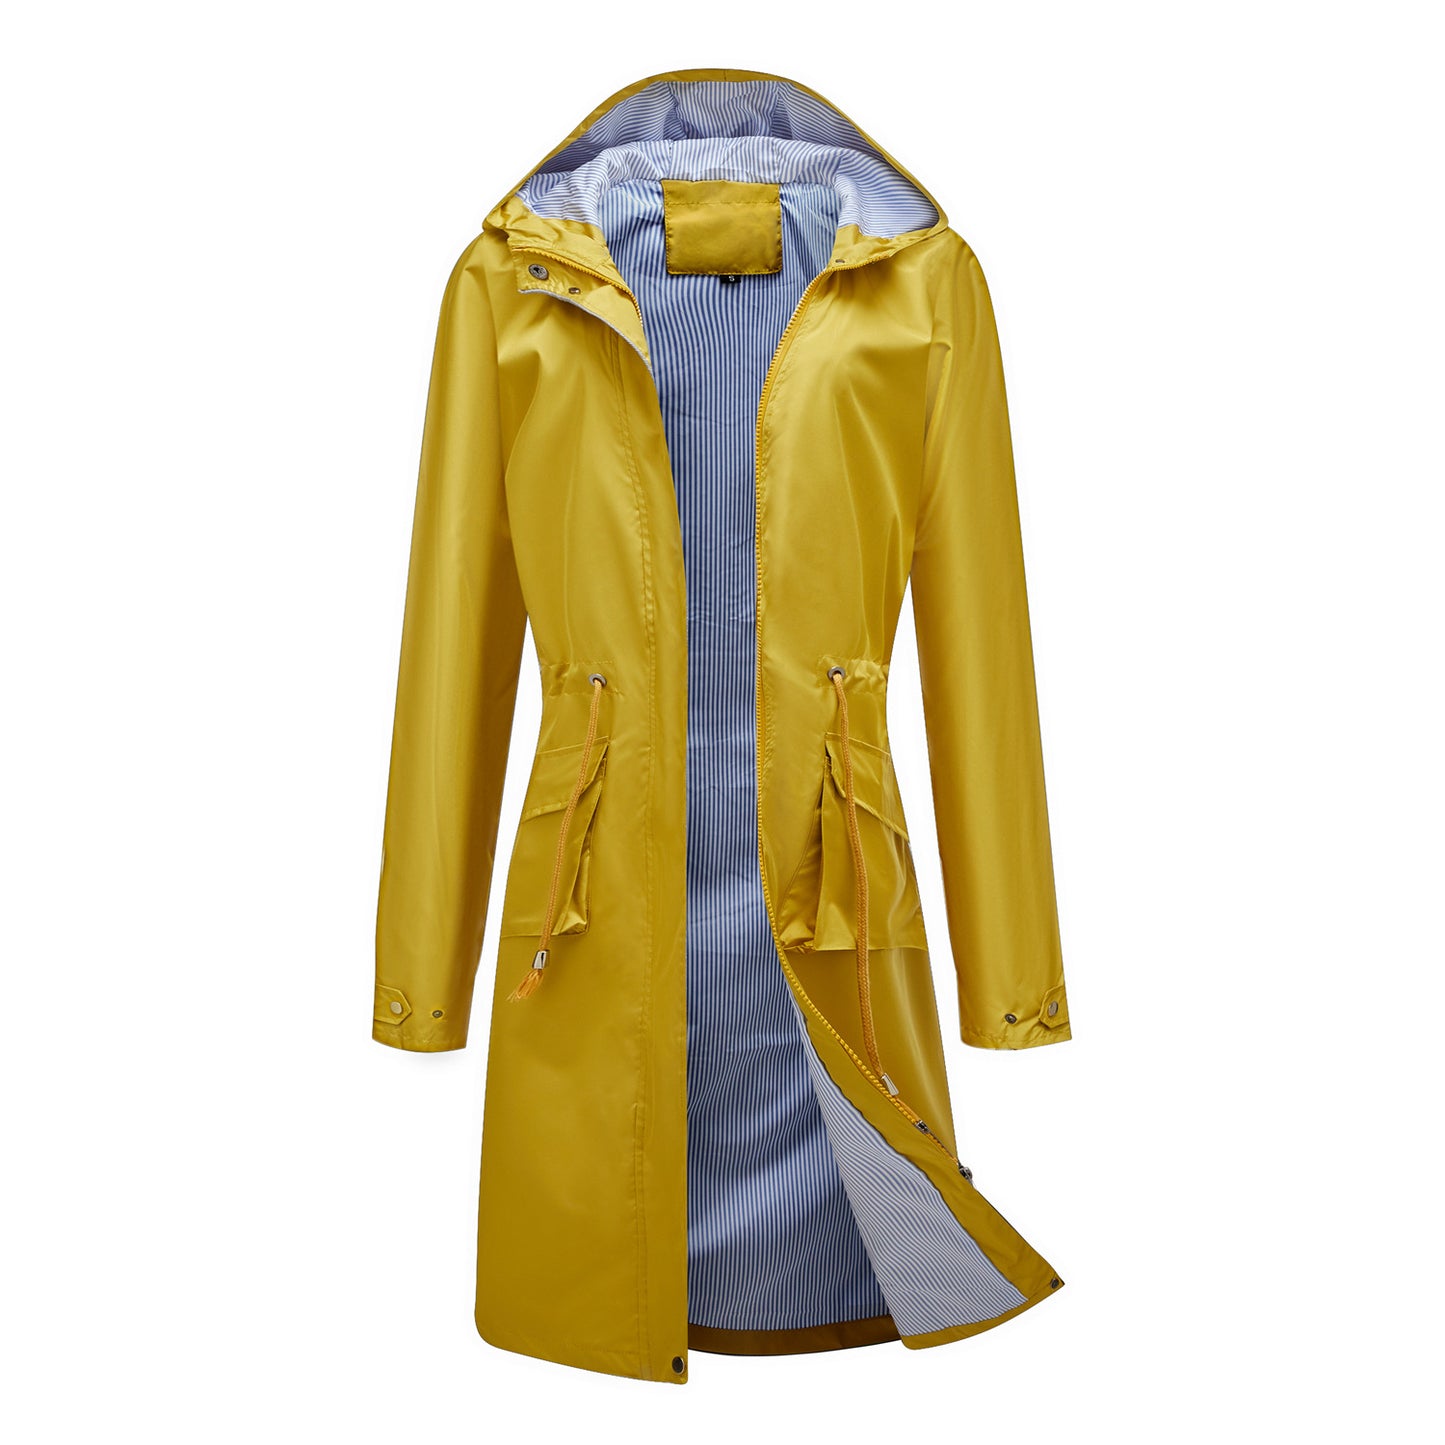 Long Casual Hooded Jacket For Women